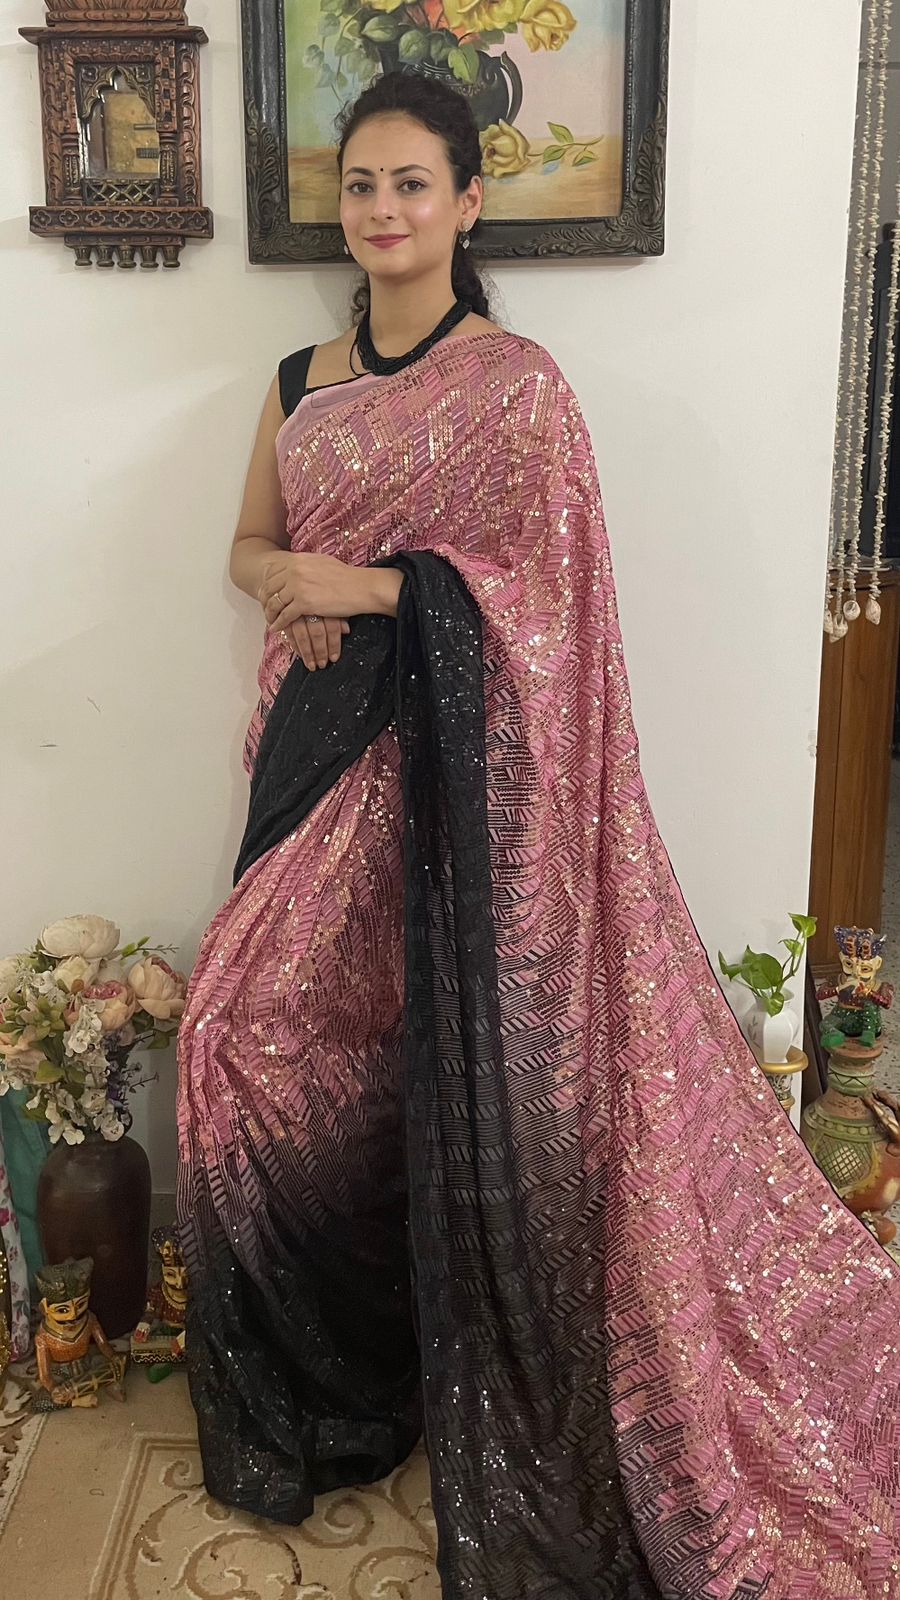 4 Wholesale Saree Market in Mumbai Spots To Visit For Your Wedding Shopping  Spree